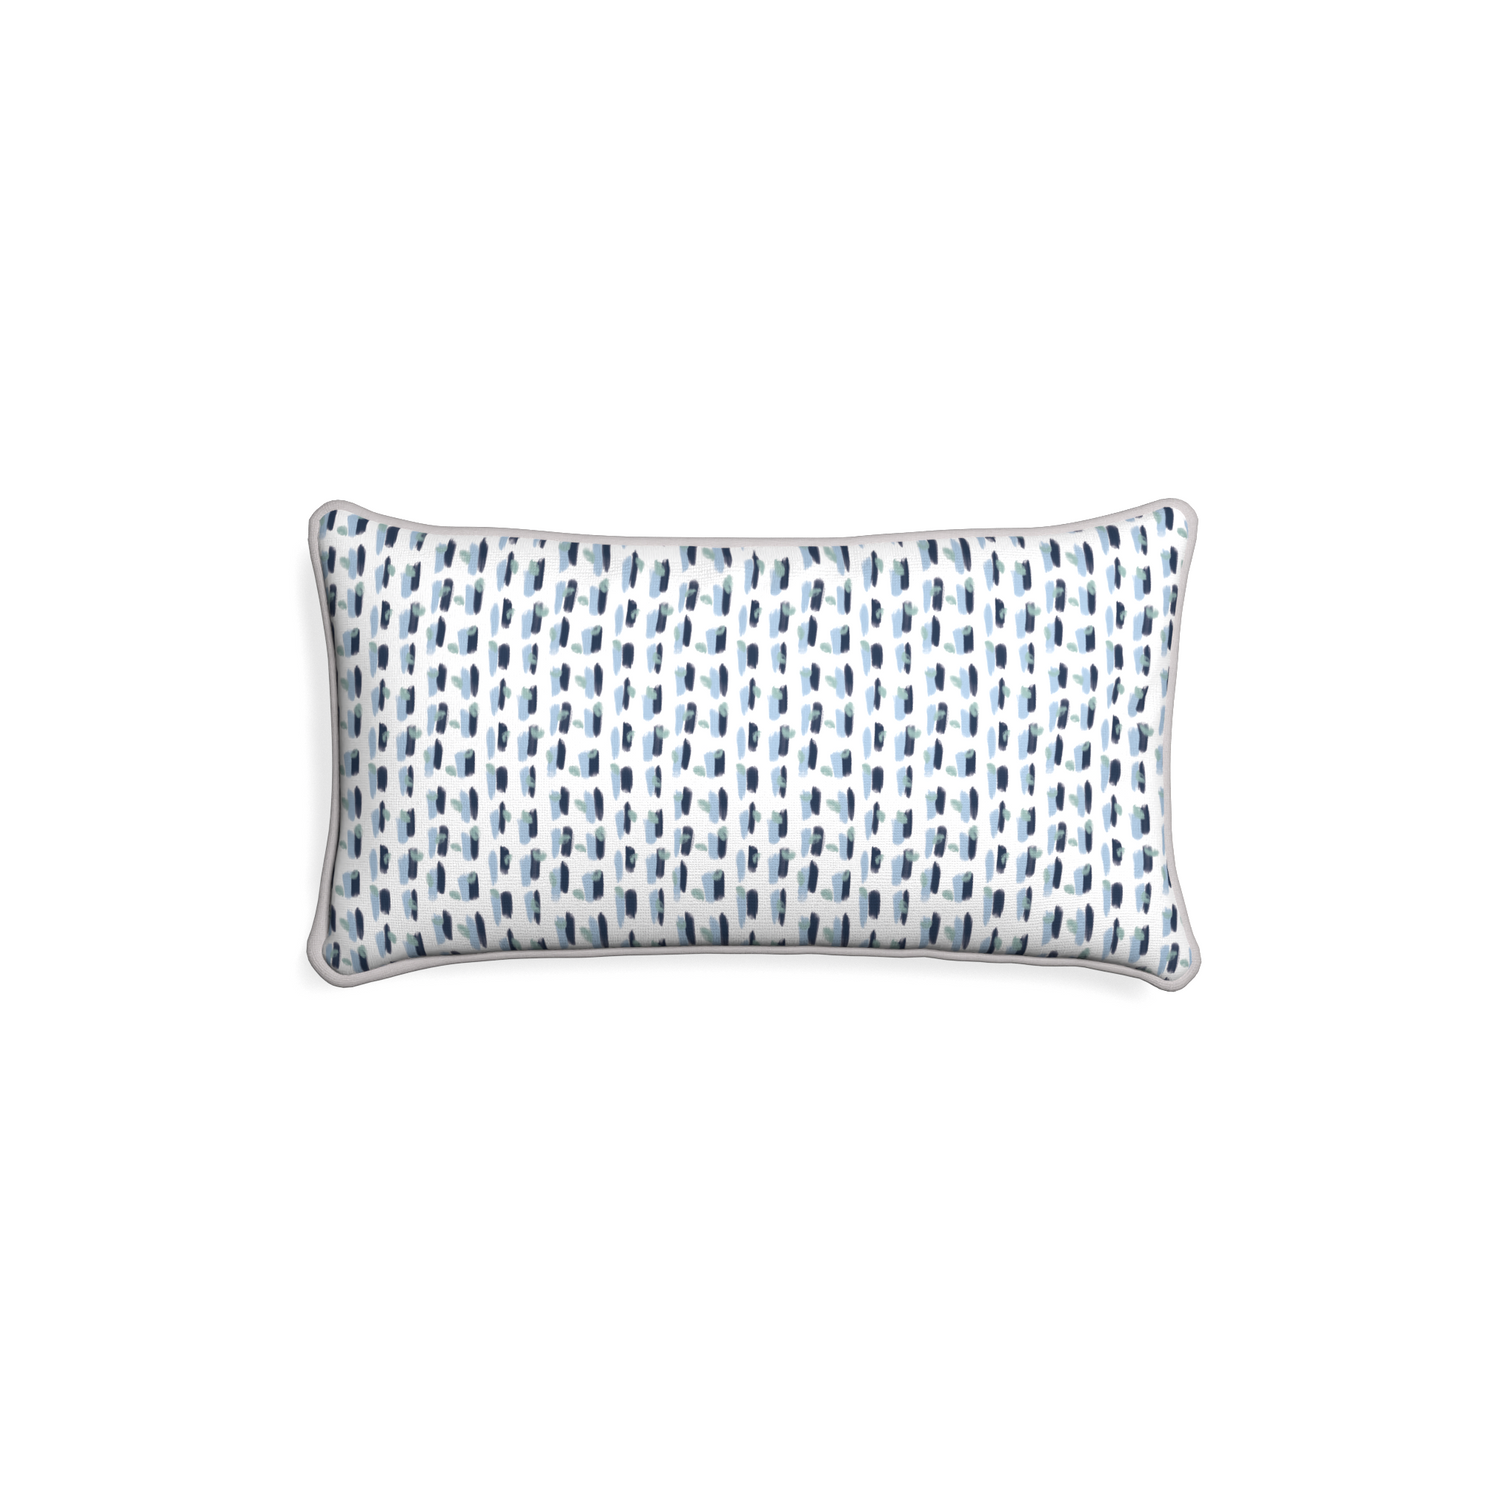 Petite-lumbar poppy blue custom blue and whitepillow with pebble piping on white background